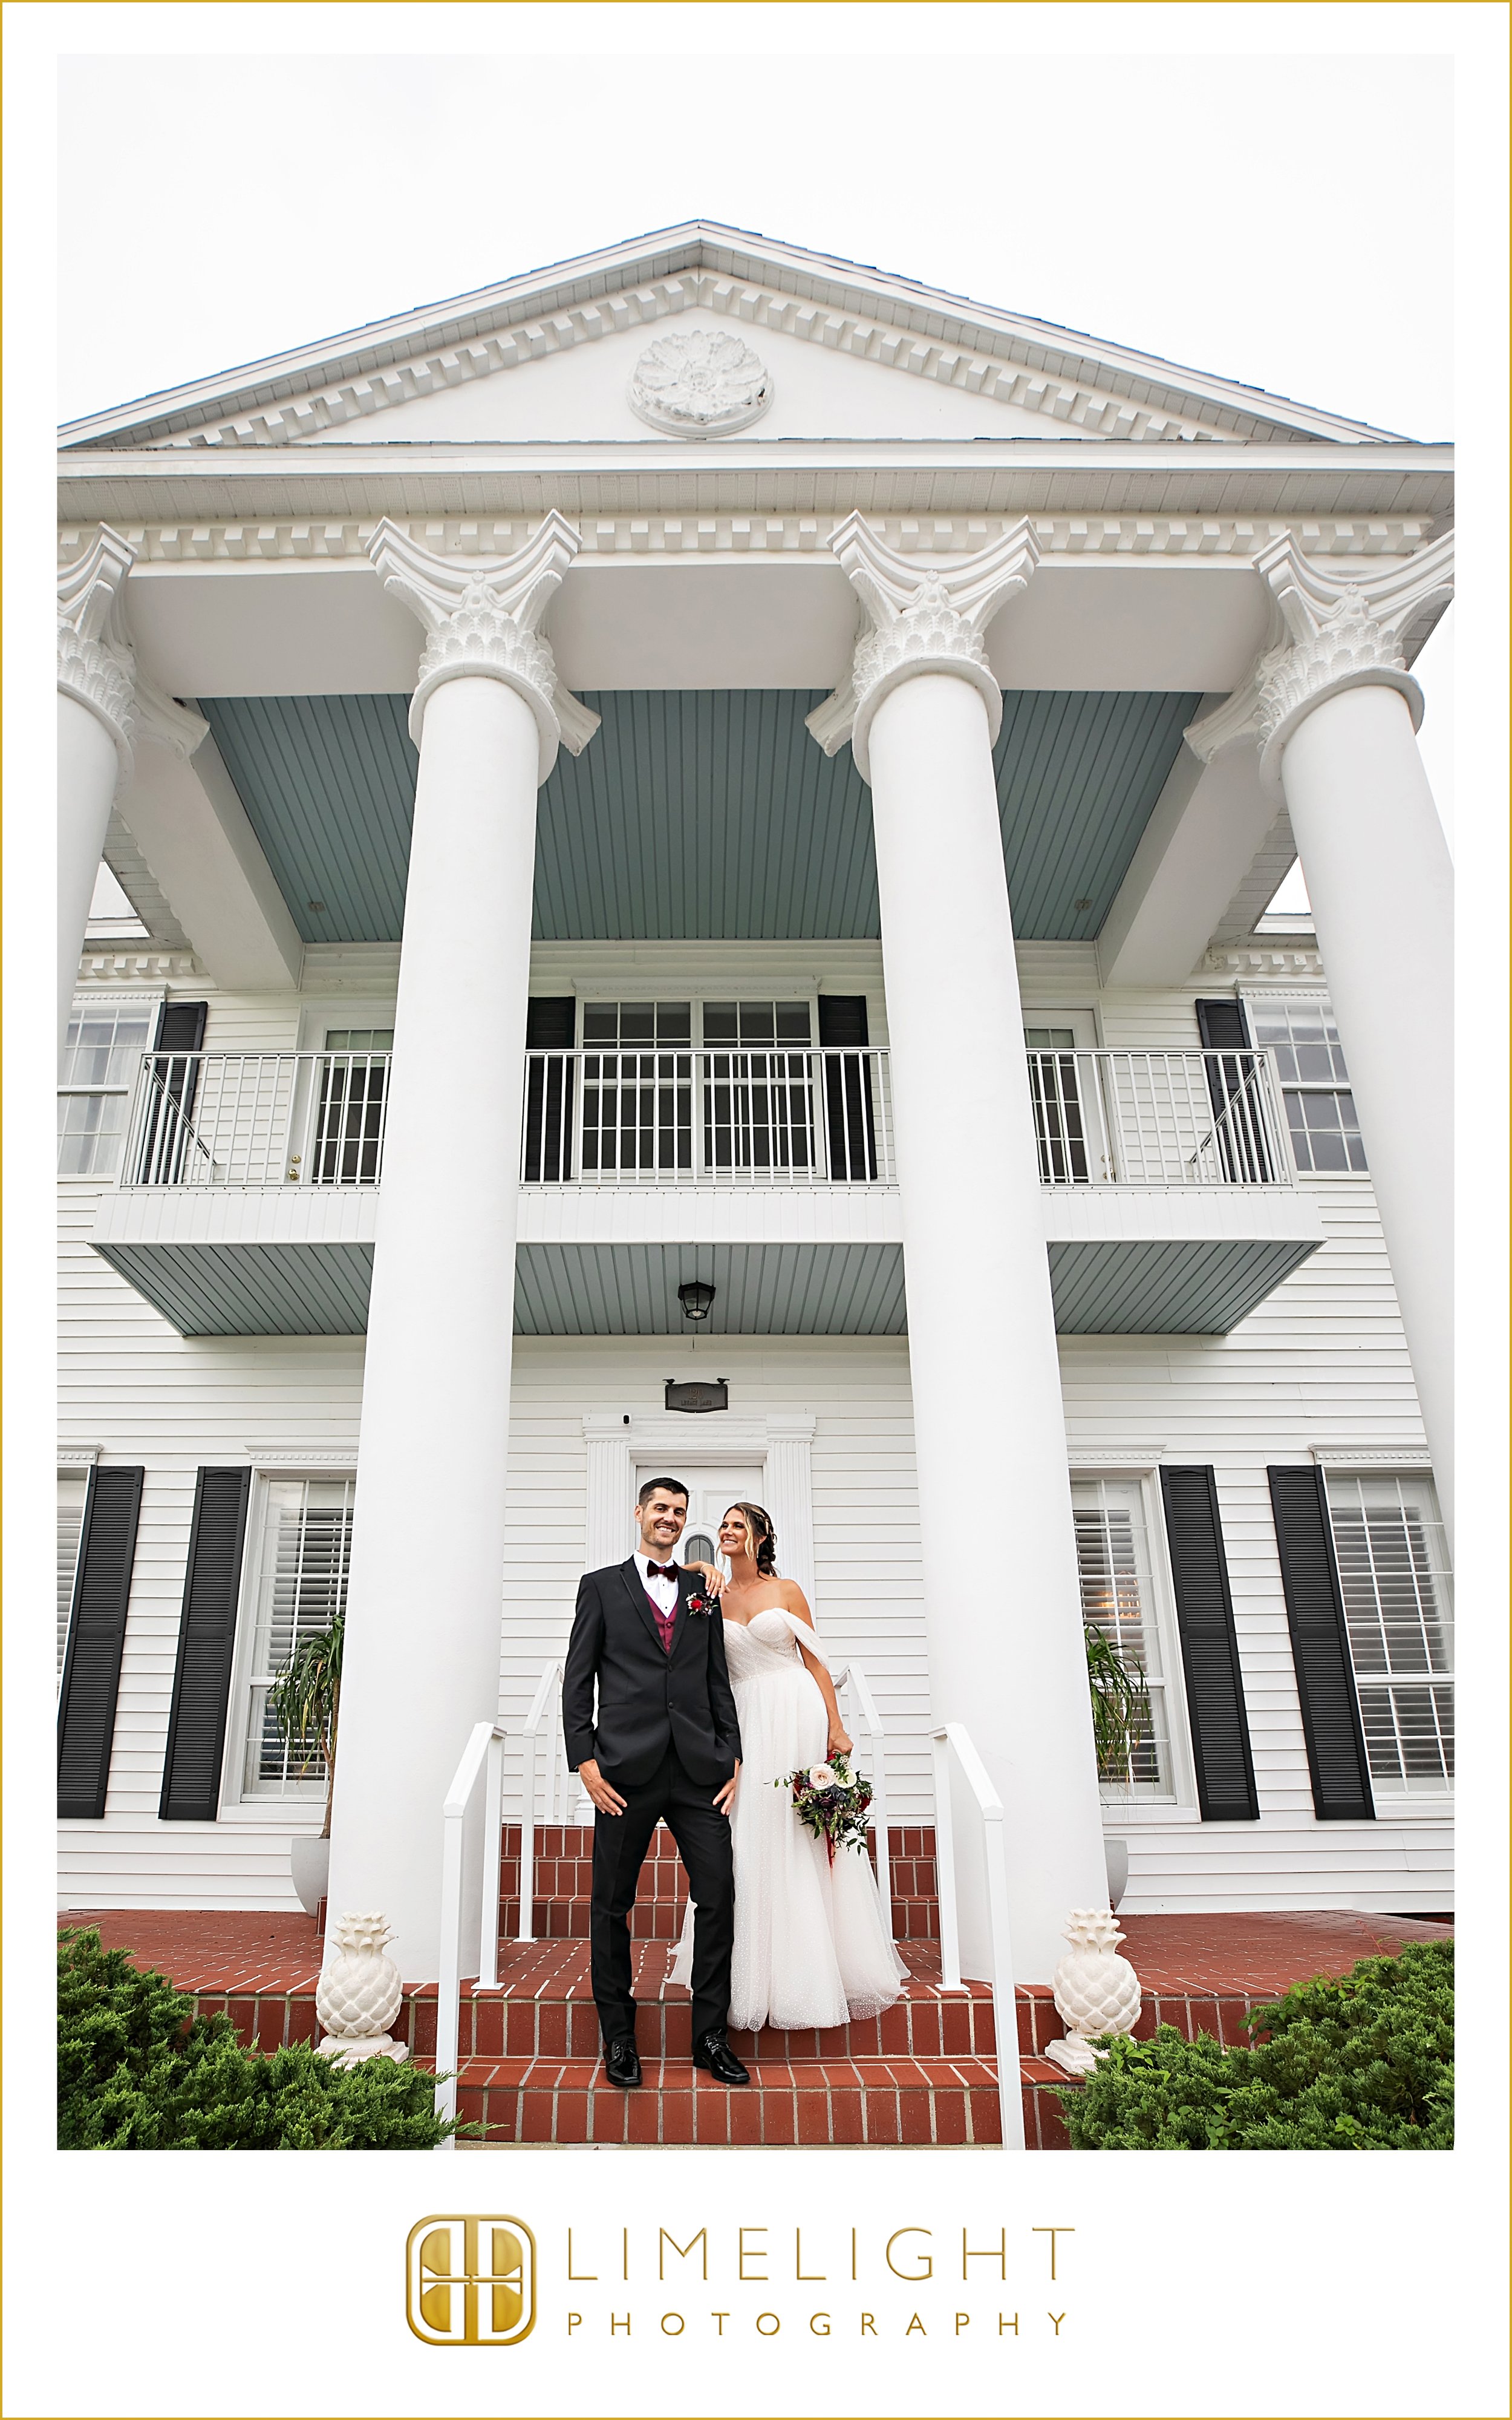 0064-wedding-photography-packages-legacy-lanes-brooksville-fl.jpg